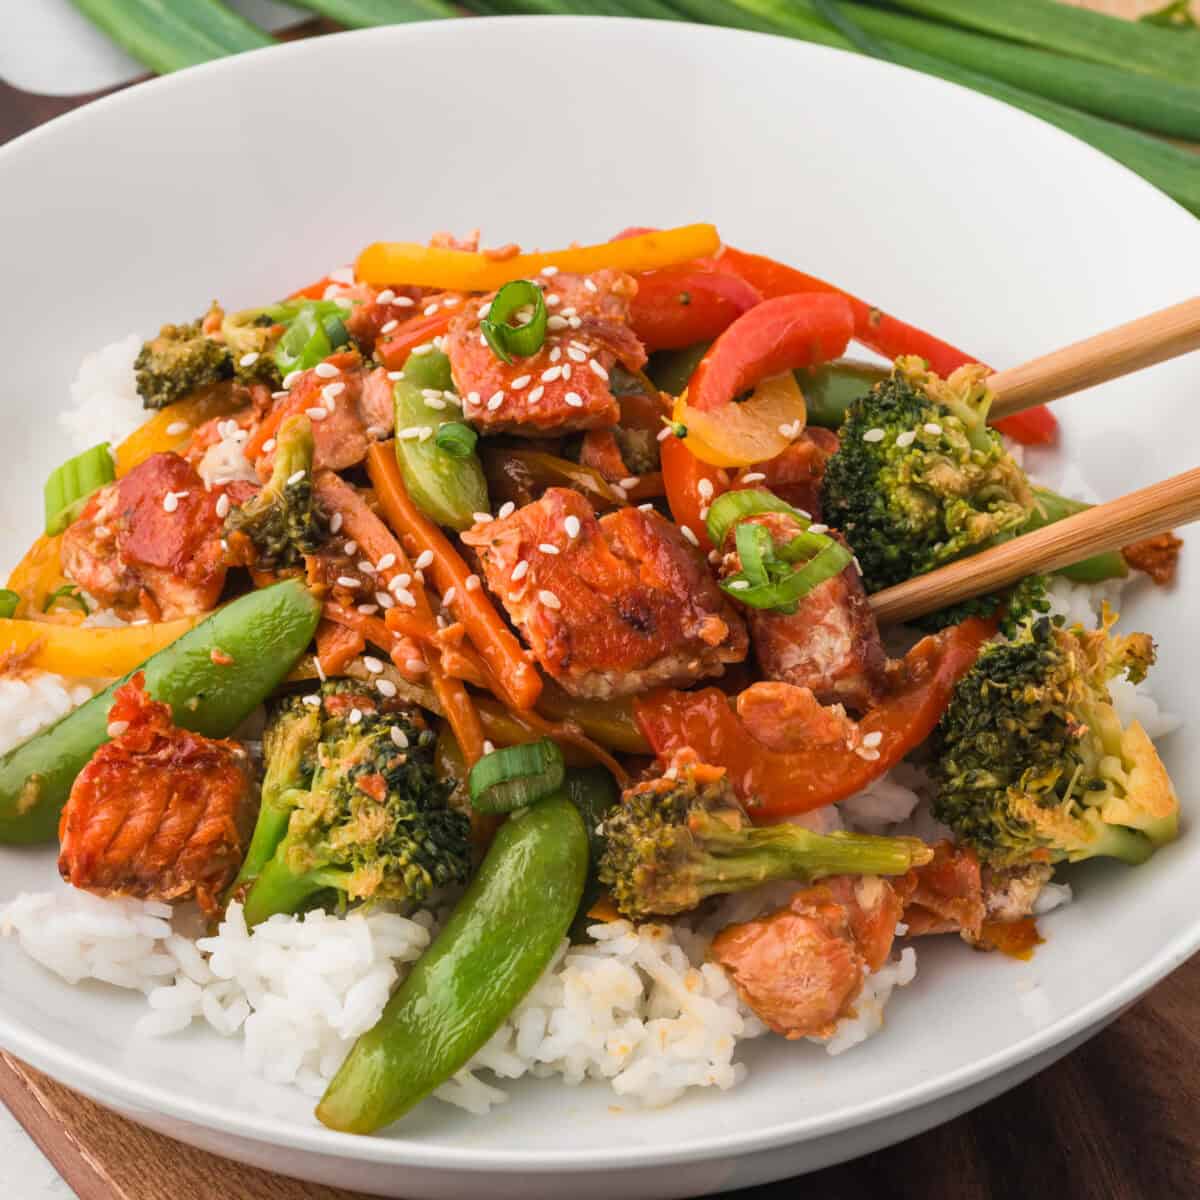 Salmon stir fry with stir fry veggies over rice on a place with chop sticks.